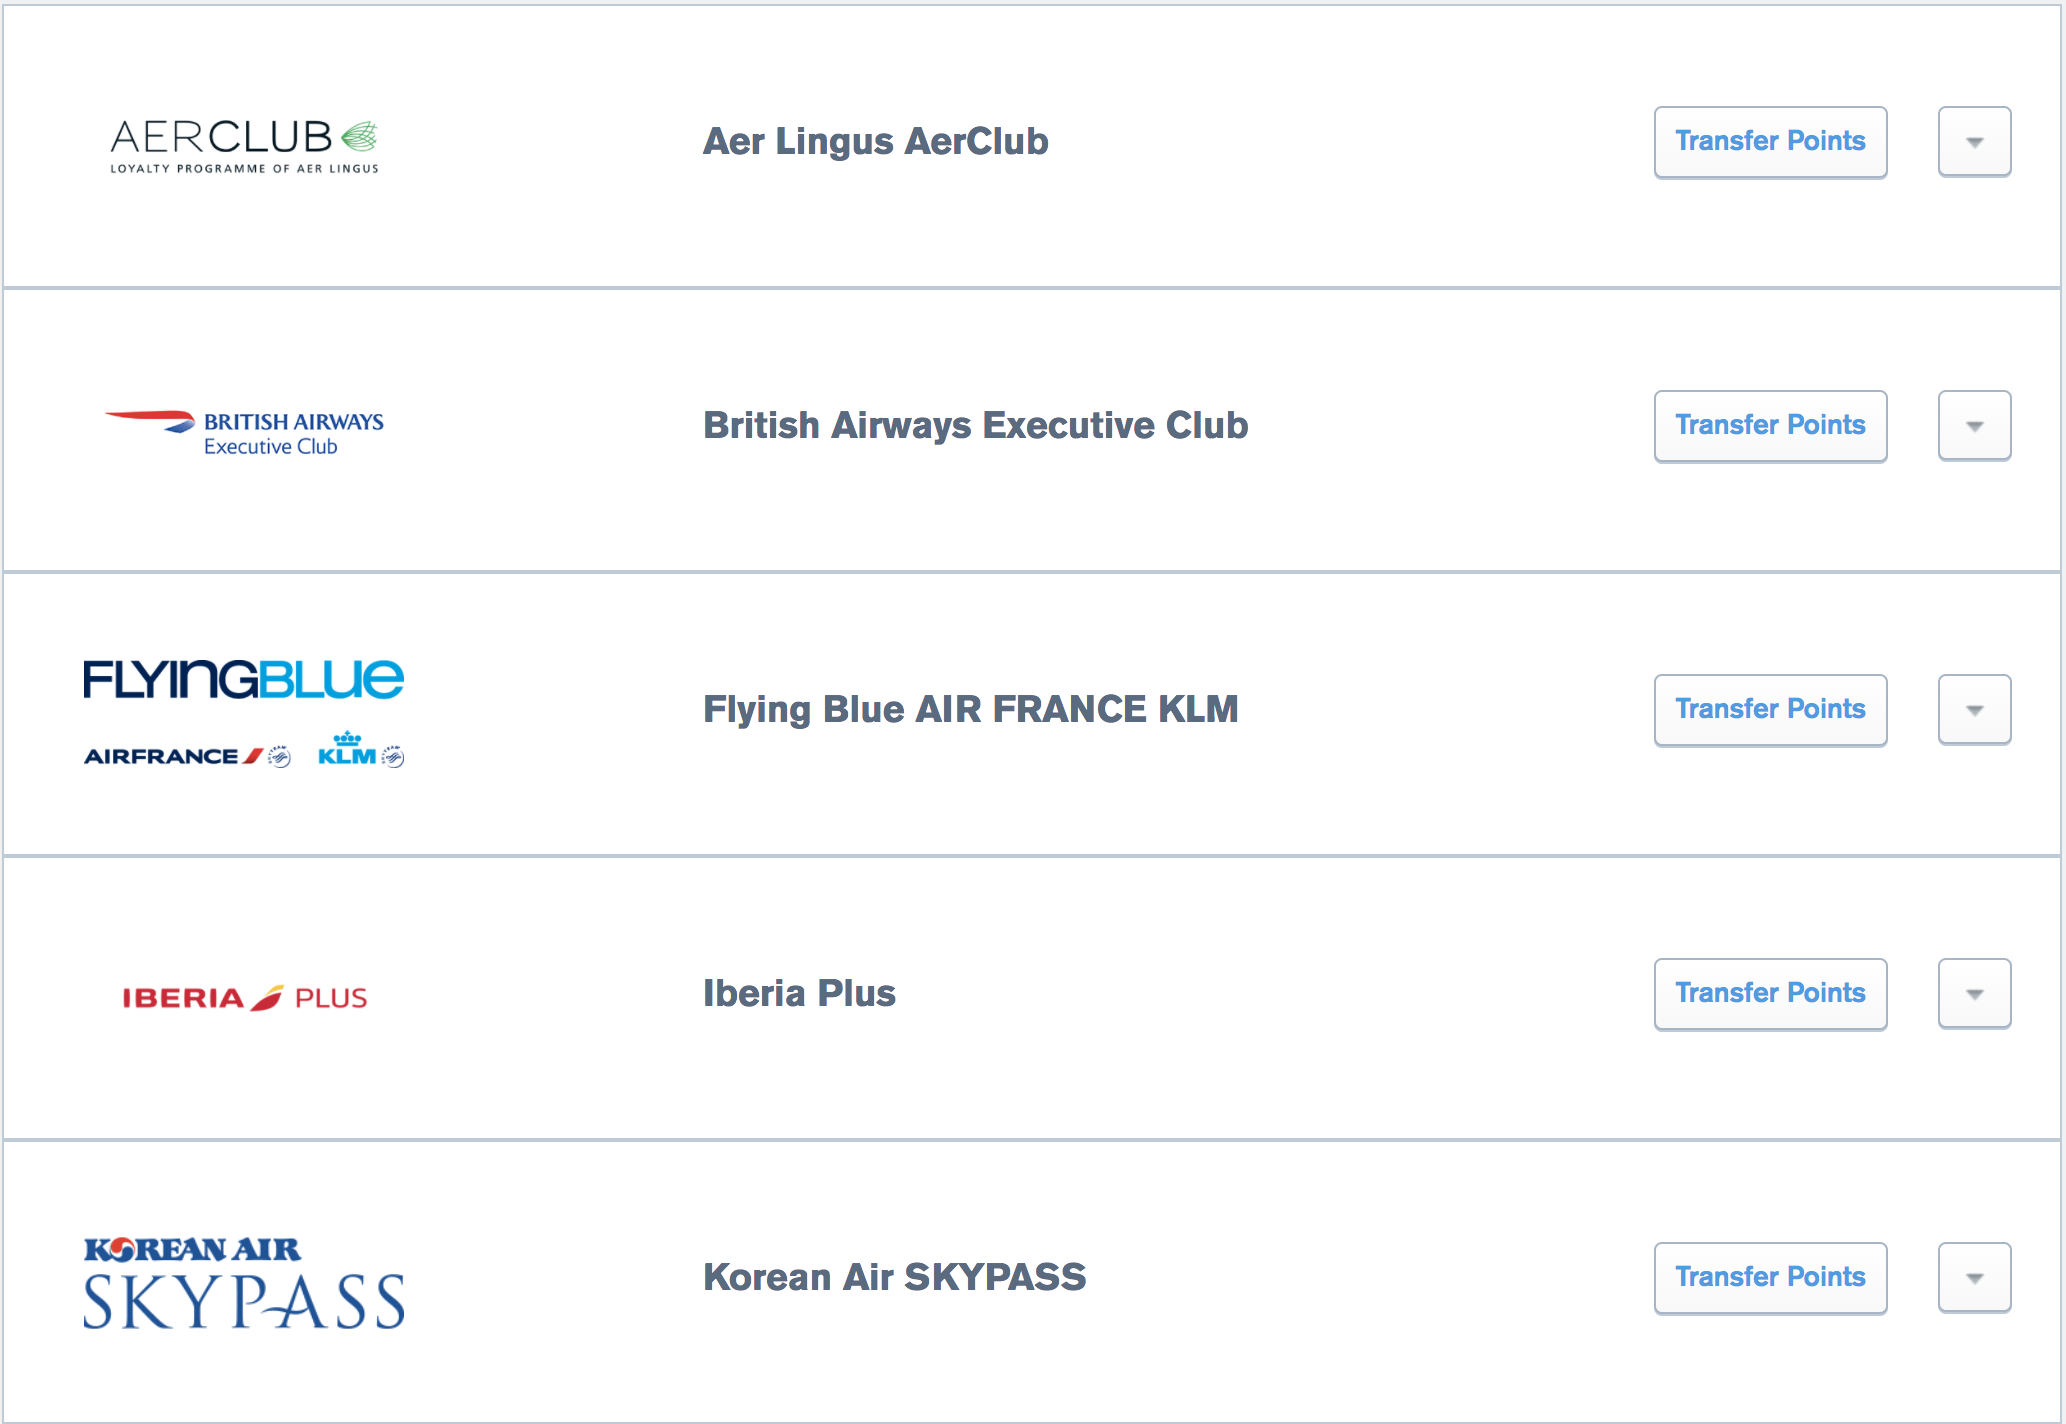 Sapphire airline partners